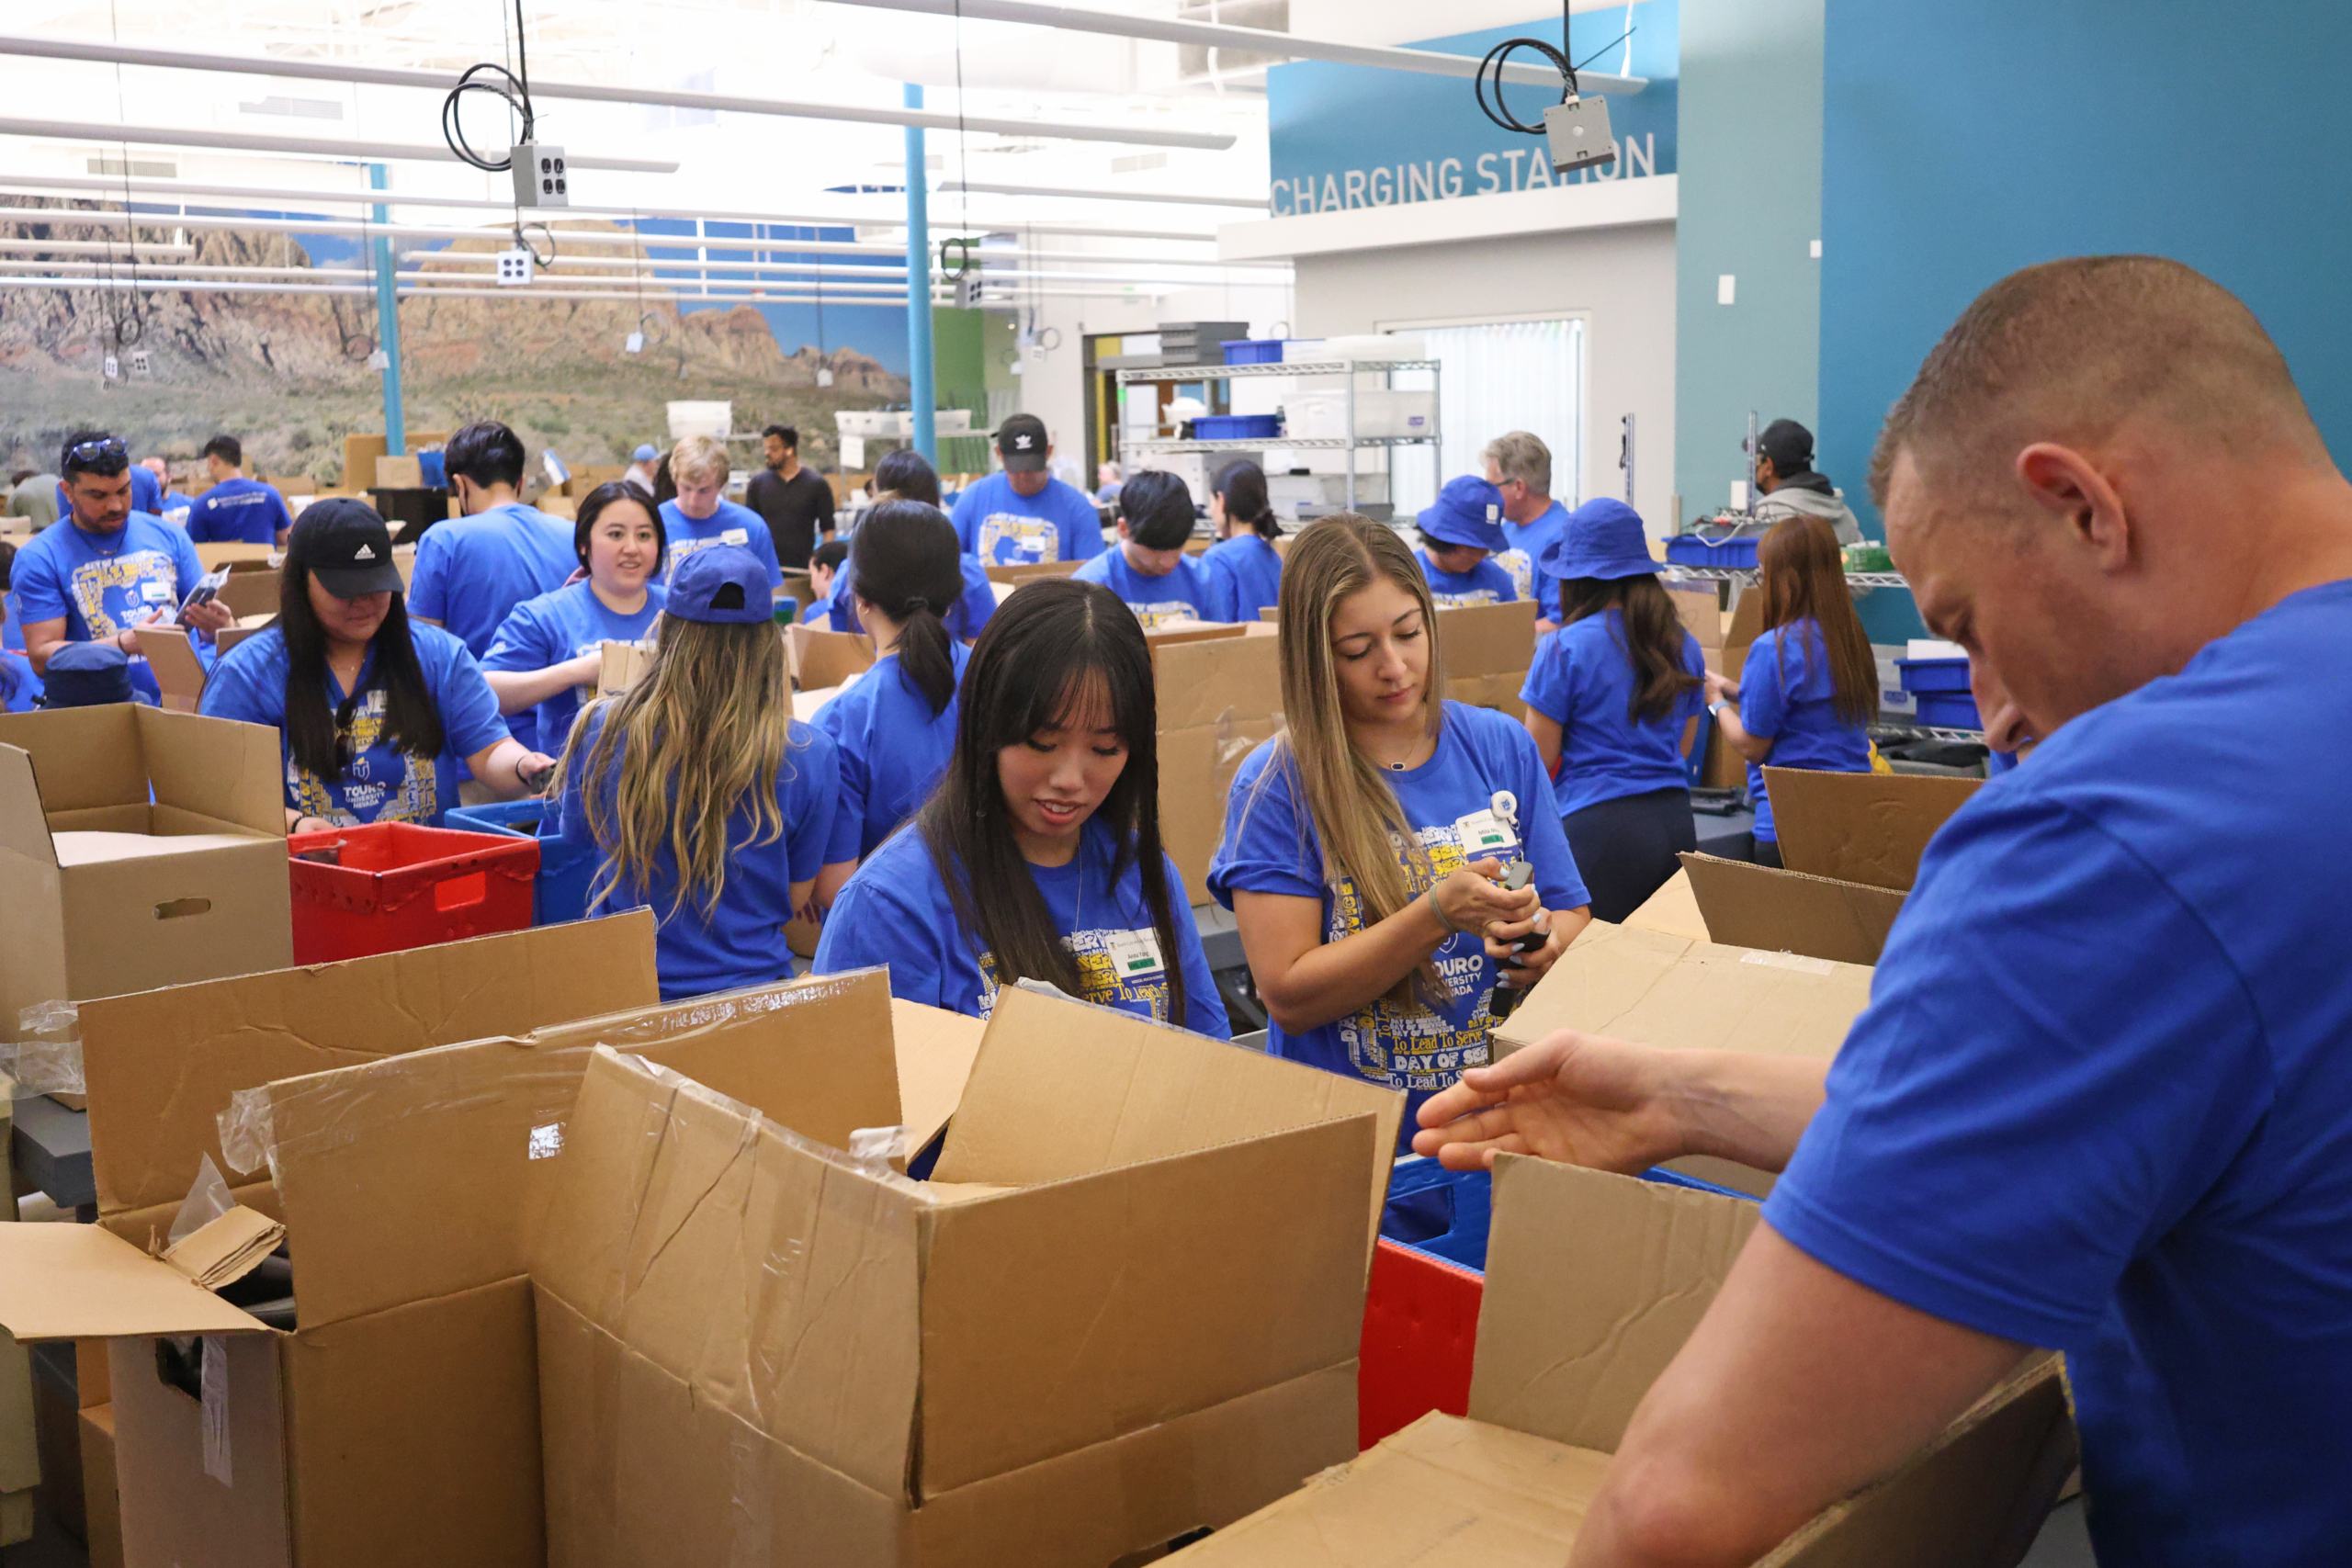 group of people in blue shirts packing cardboard boxes